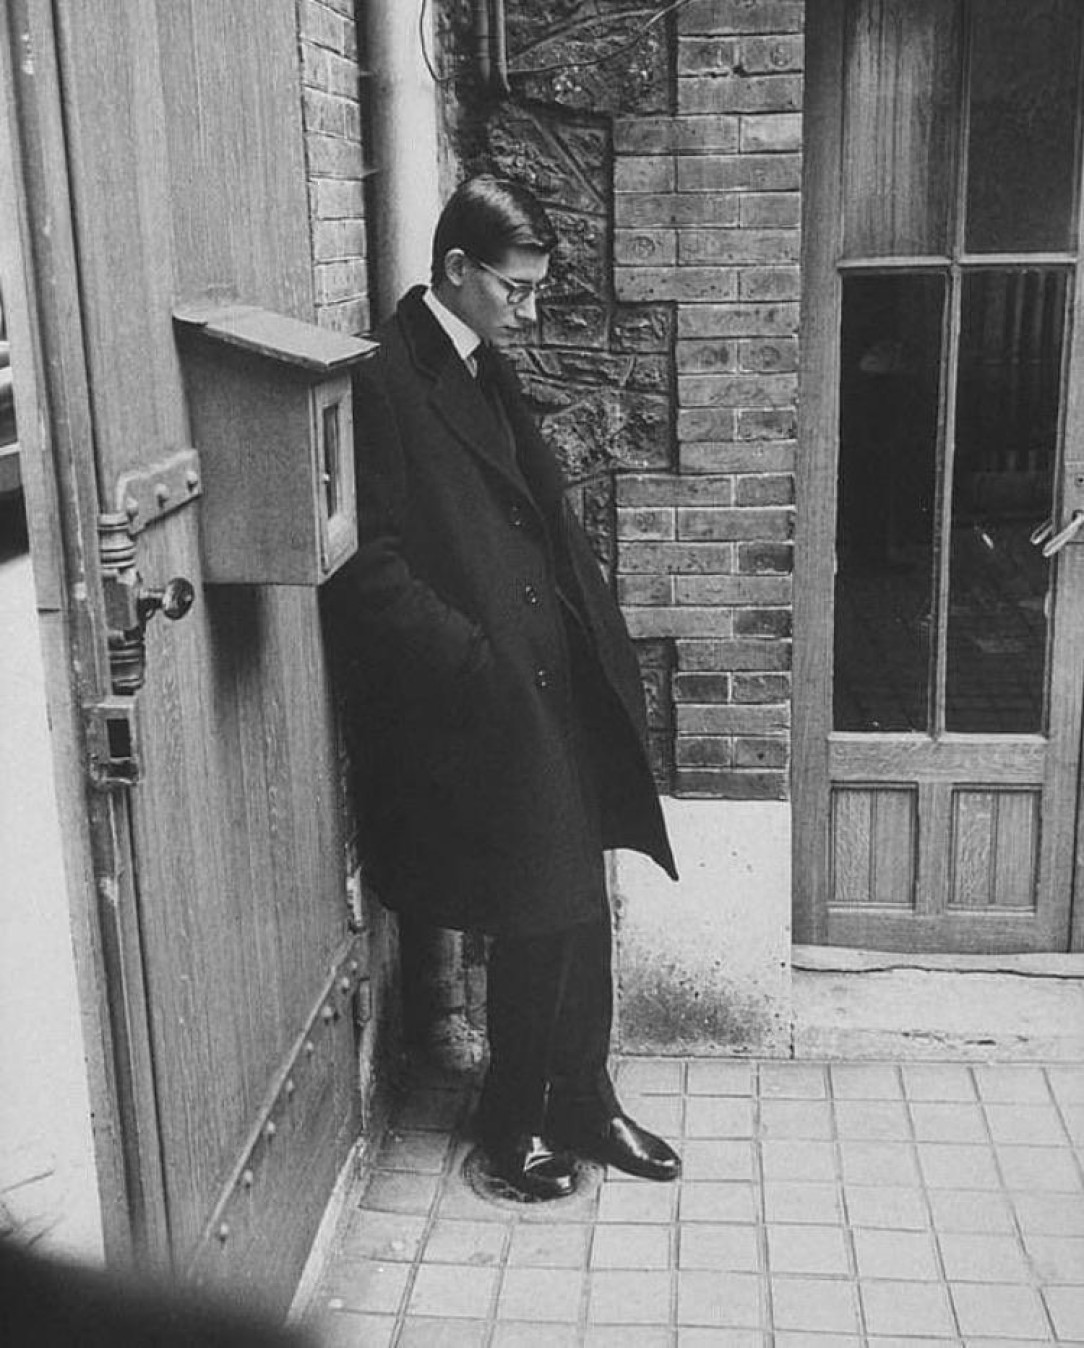 Christian Dior’s successor Yves Saint Laurent standing alone after attending Dior’s funeral, Paris 1957